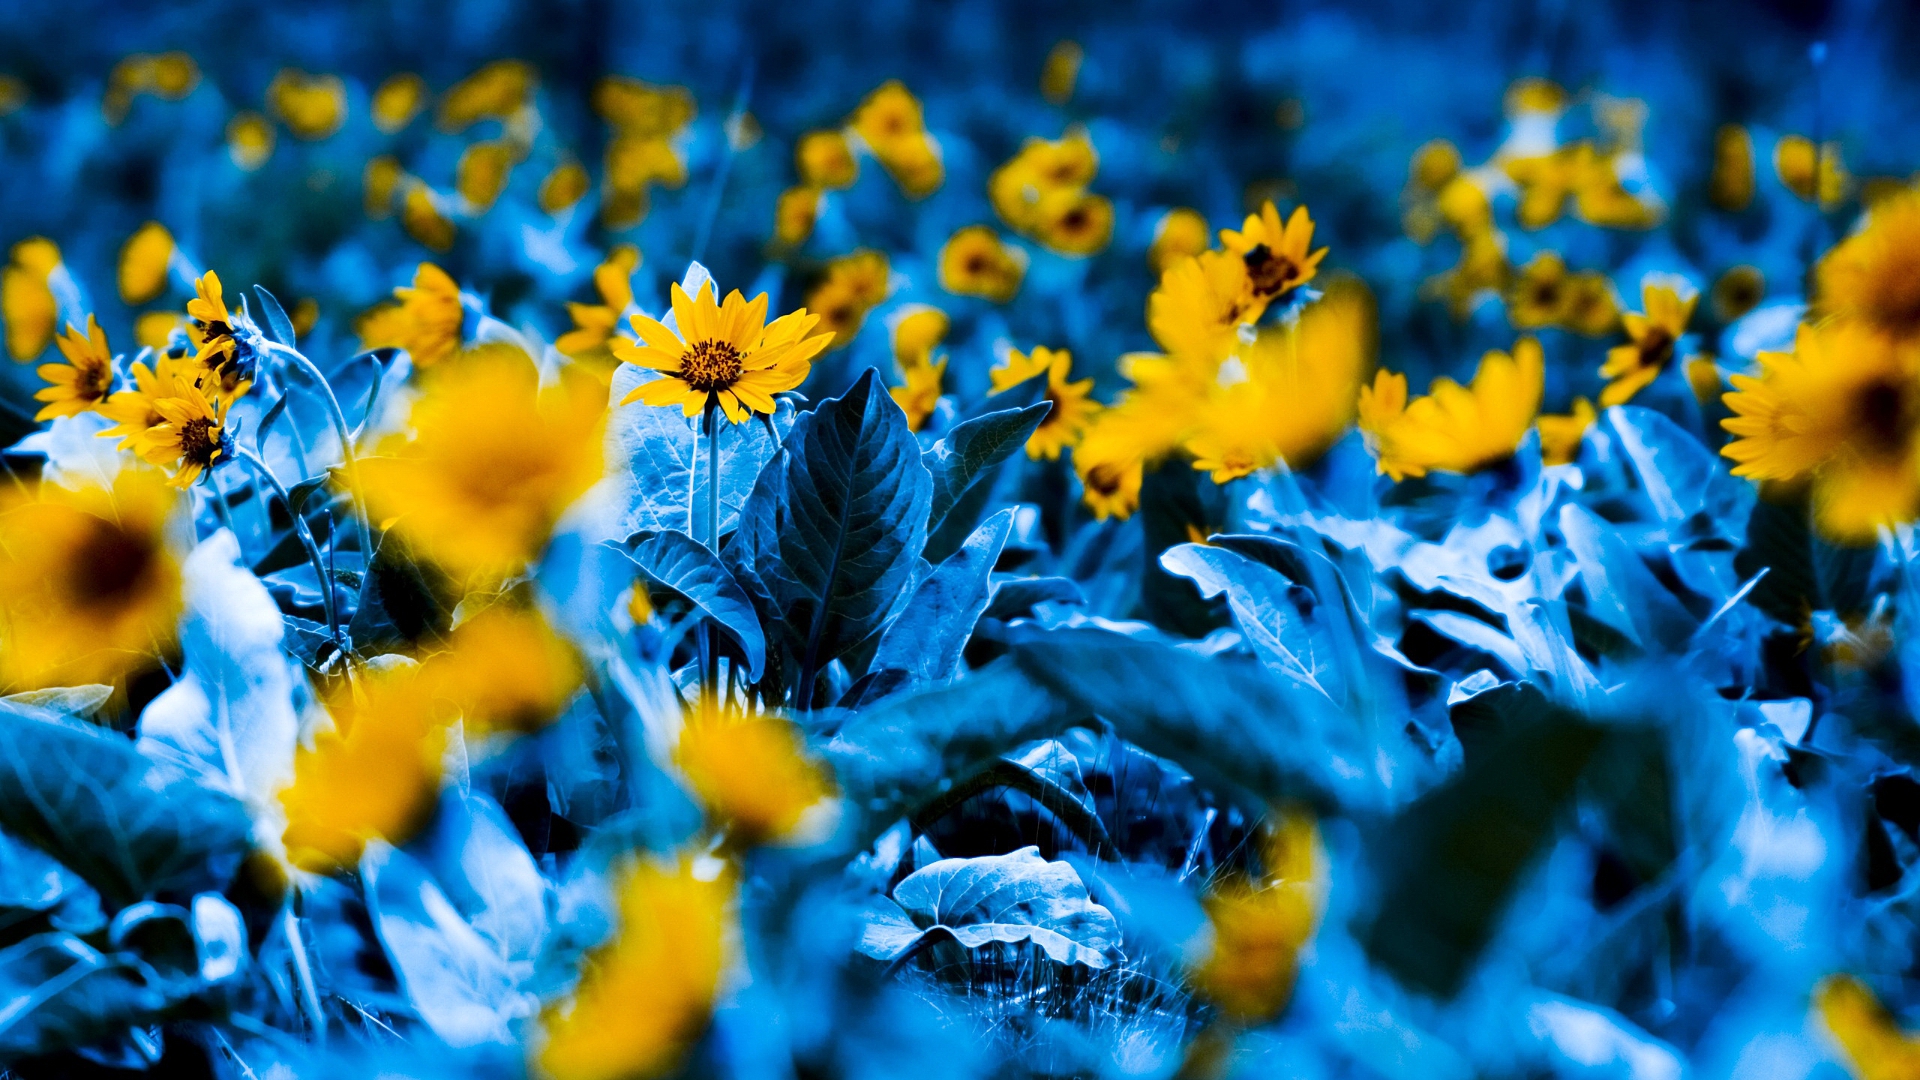 Colorful Photography Flowers Yellow Flowers Yellow Selective Coloring Depth Of Field Grass Blue 1920x1080